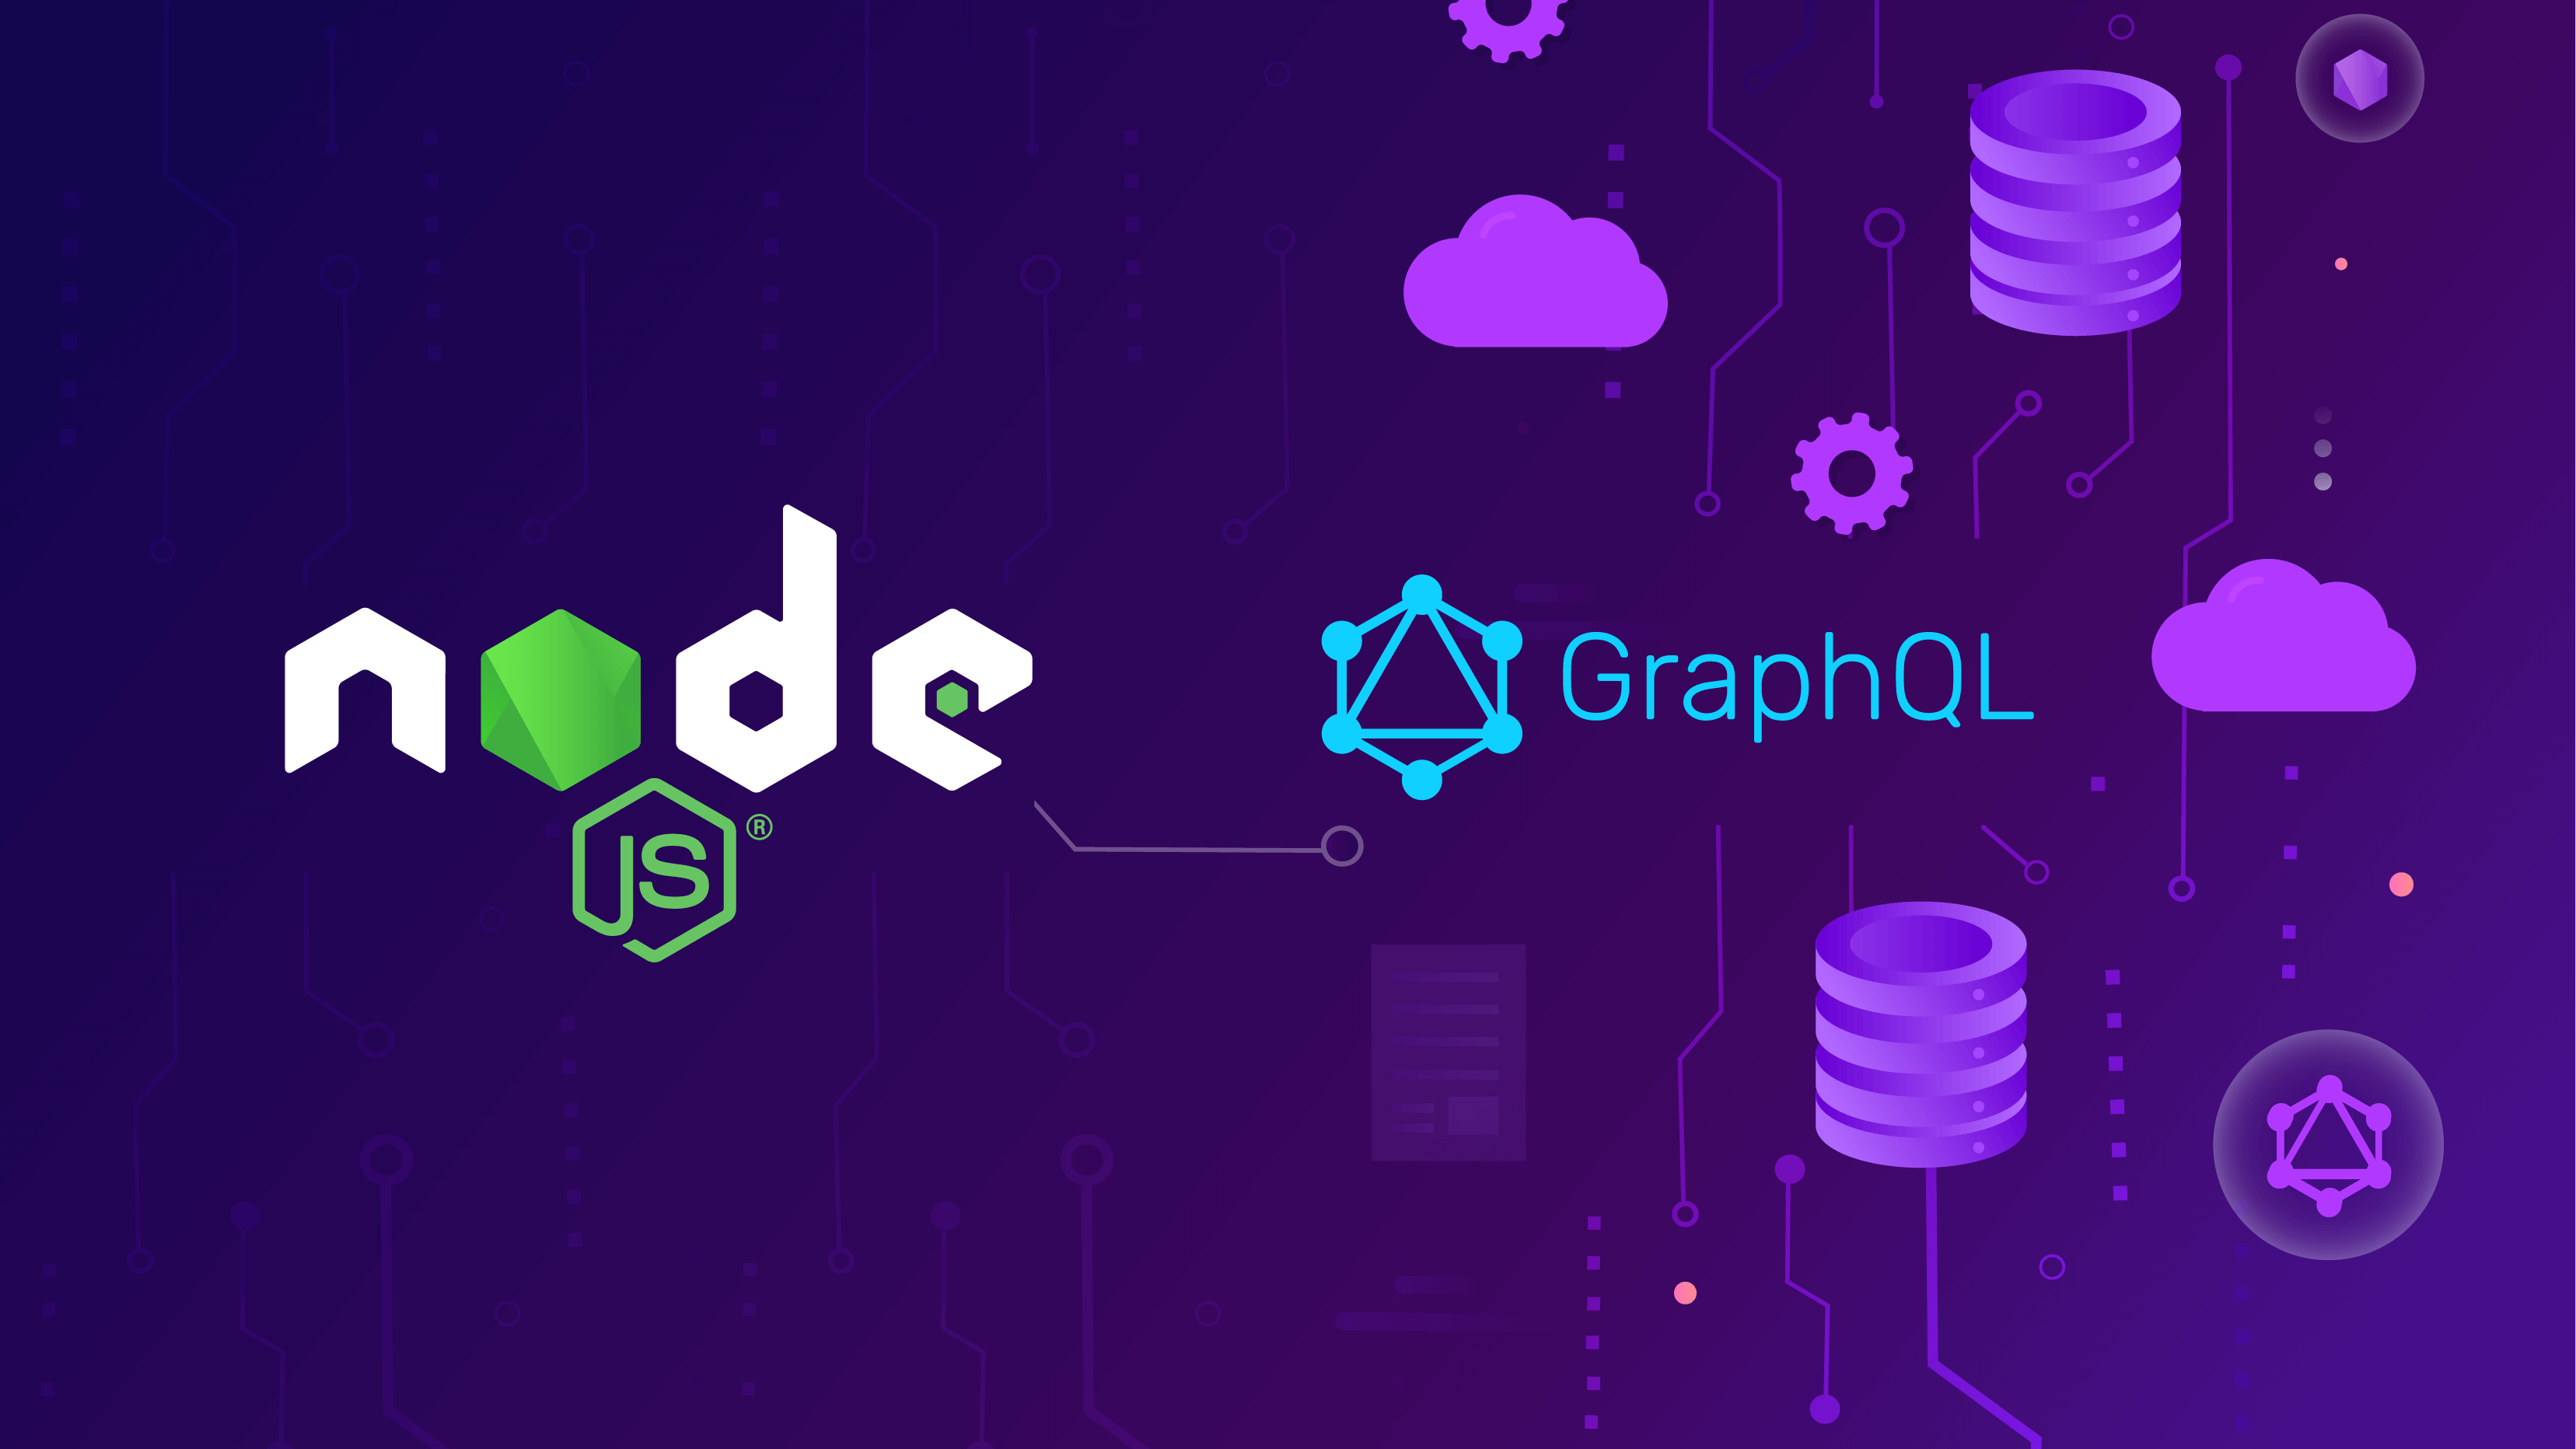 How to Build a GraphQL server with NodeJS and Express